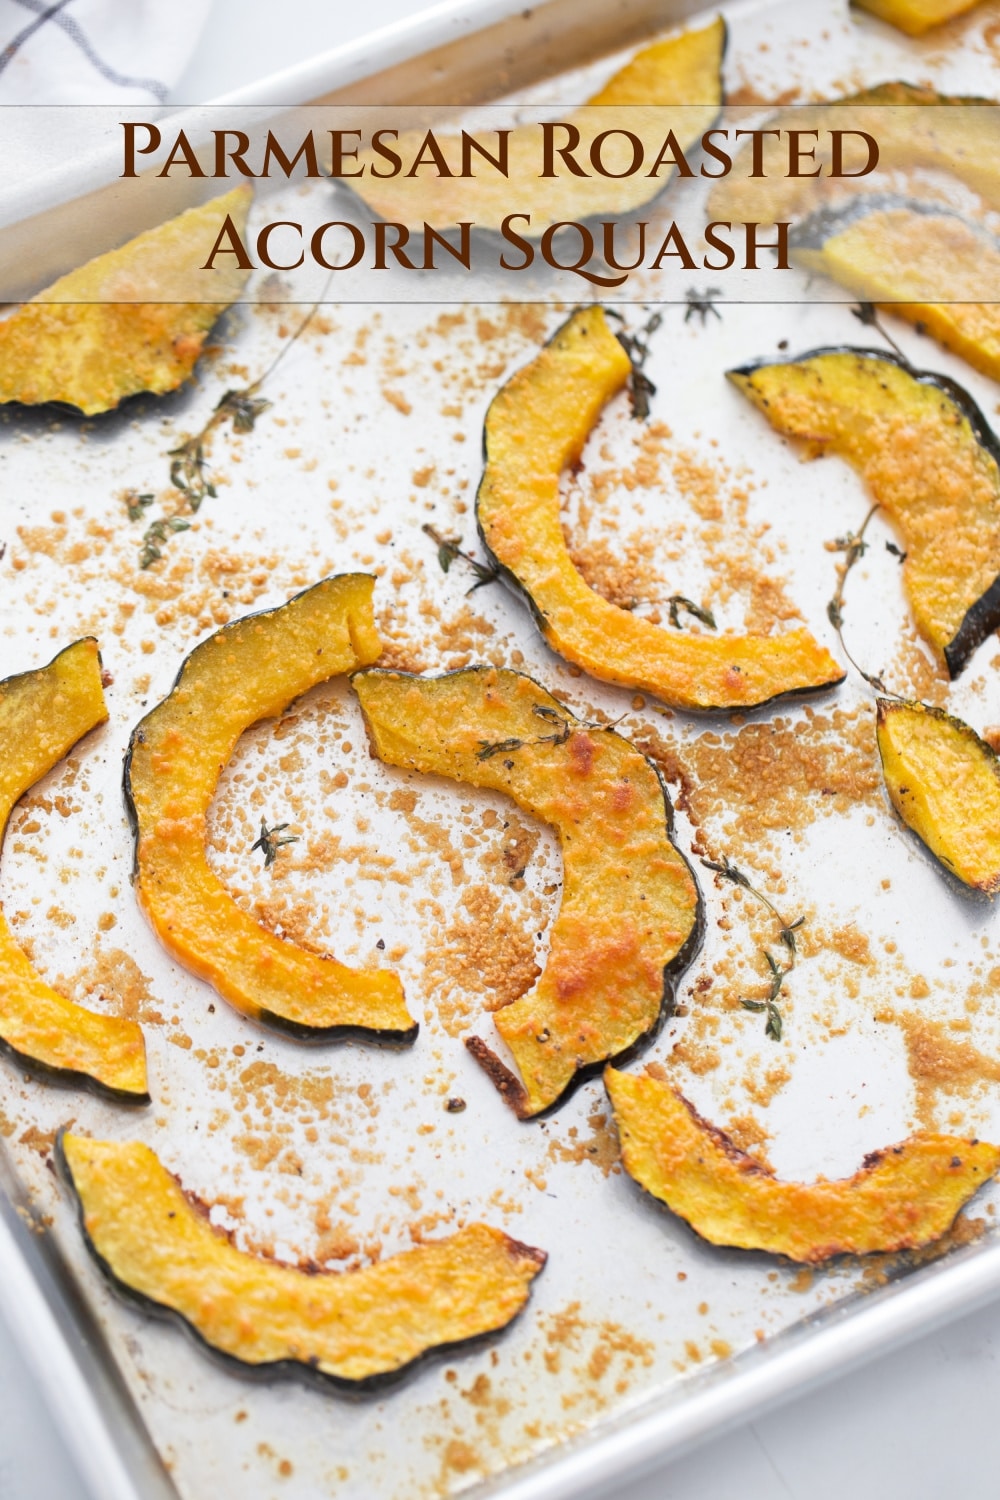 Roasted Acorn Squash - with a drizzle of olive oil, a sprinkle of woody-spiced thyme, a generous dusting of freshly grated Parmesan, and a little solo session in the oven, you're just moments away from savoring this seasonal squash for dinner. via @cmpollak1